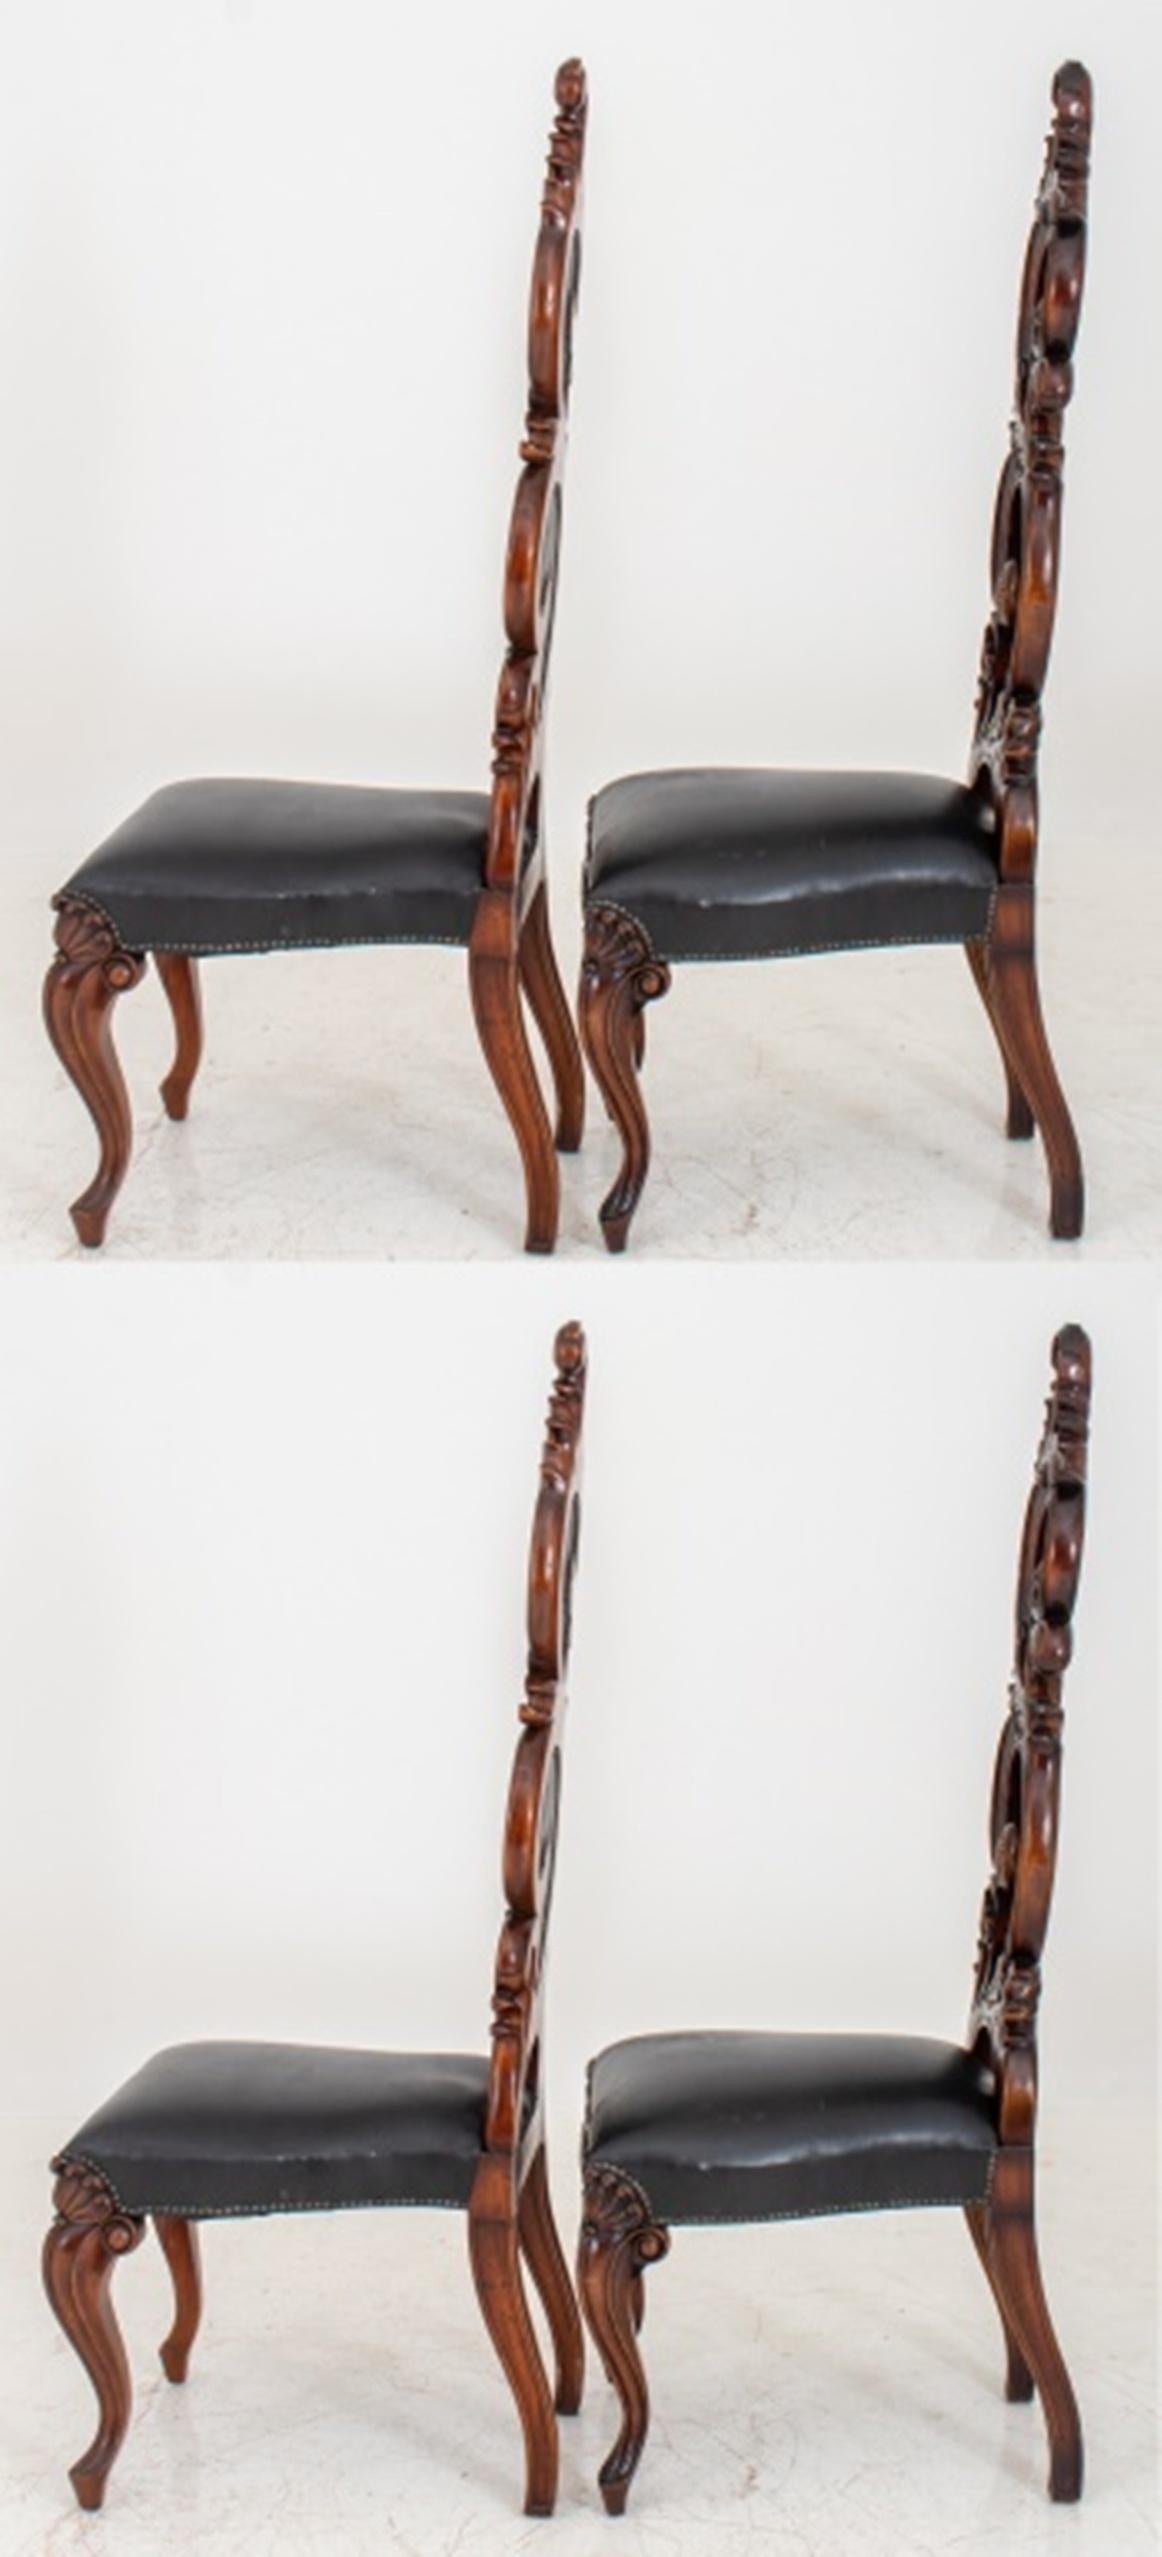 Four Fantasy Rococo dining chairs, the body carved with a swirling acanthus design punctuated by black leather inserts and hammered tacks on the back, seat upholstered black leather, cabriole legs accentuated with anthemia.

Dimensions: 61.5